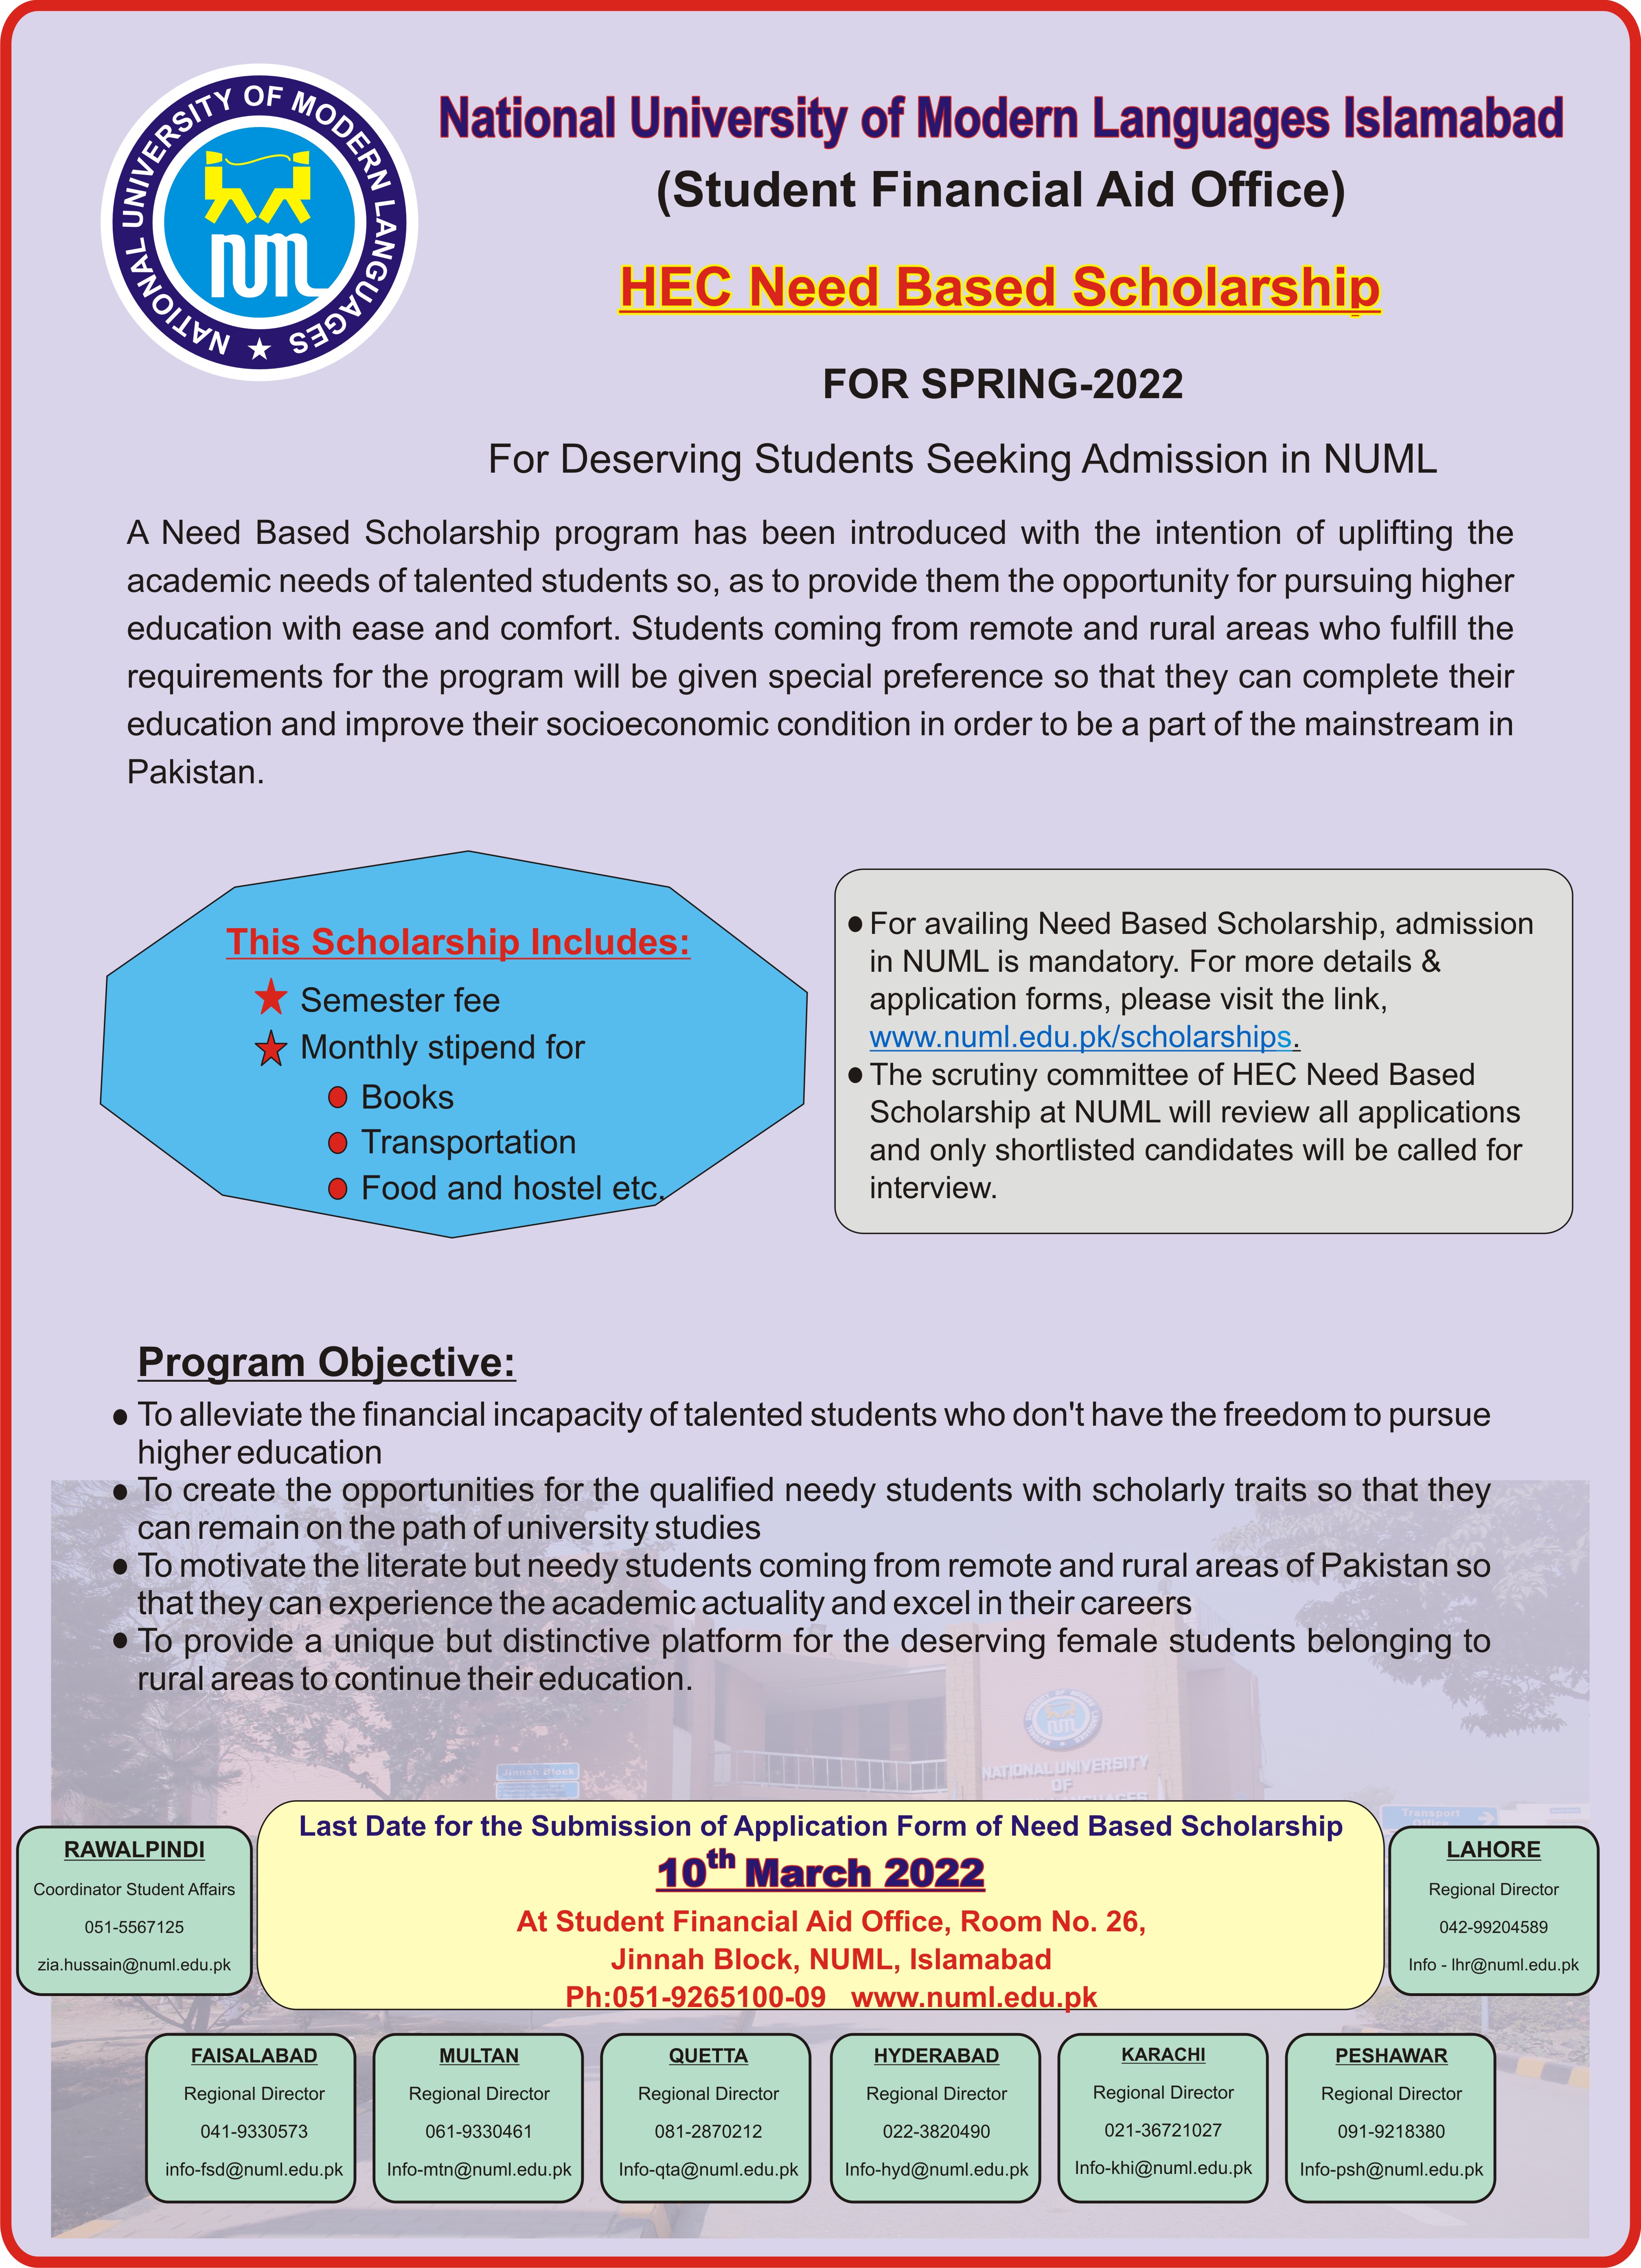 Announcement of HEC Need Based Scholarship Program